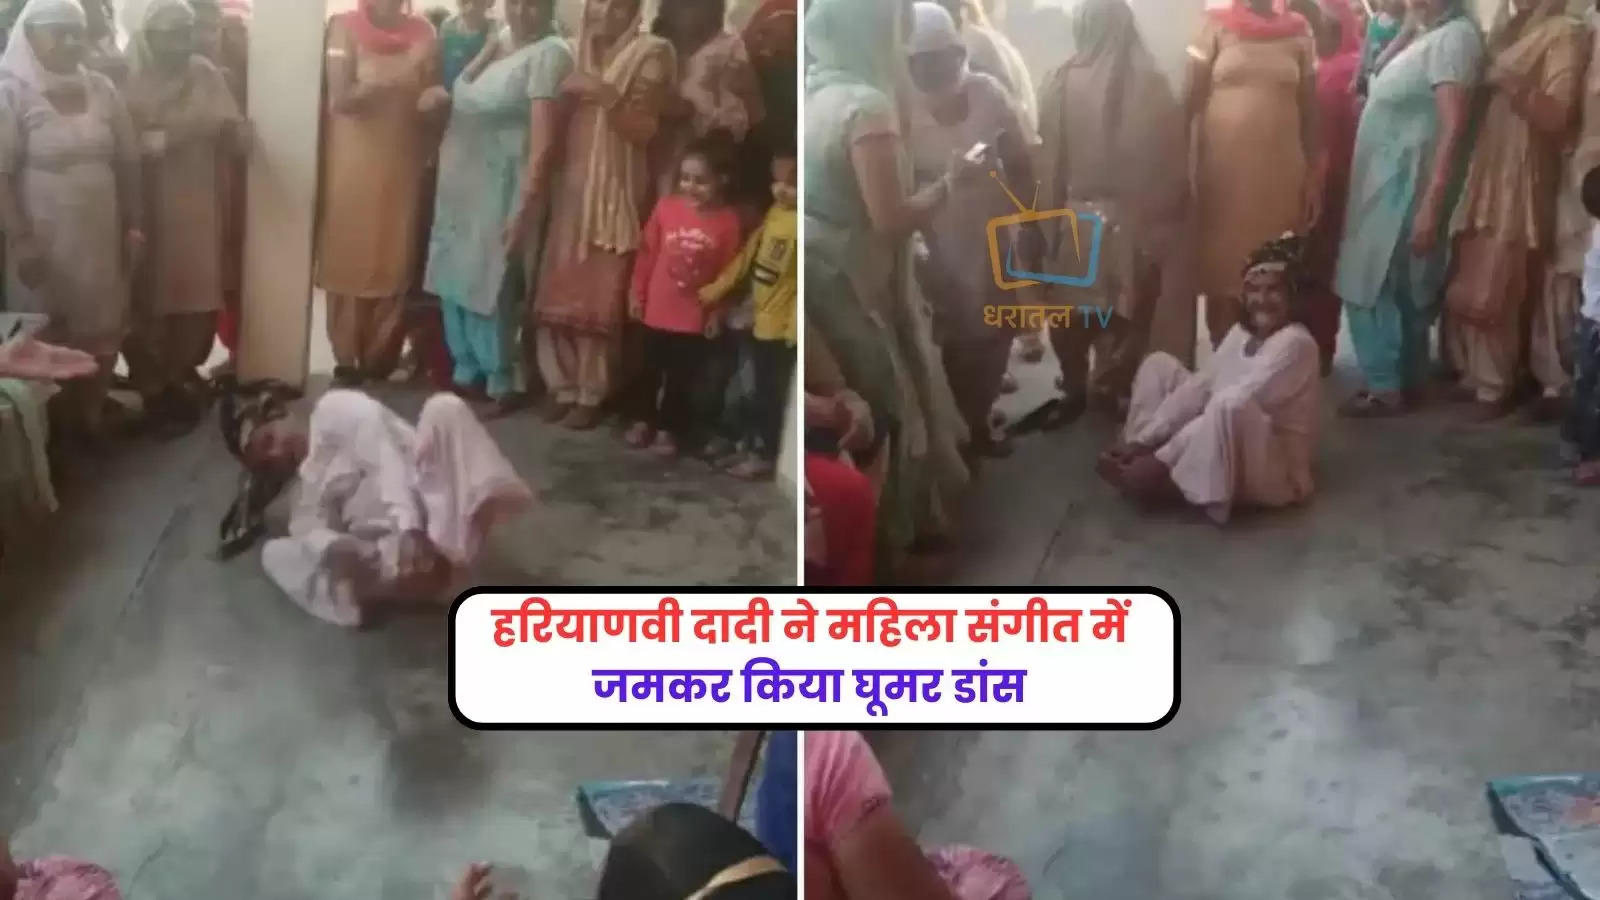 dadi-energetic-dance-on-haryanvi-song-will-make-you-laugh-see-viral-video